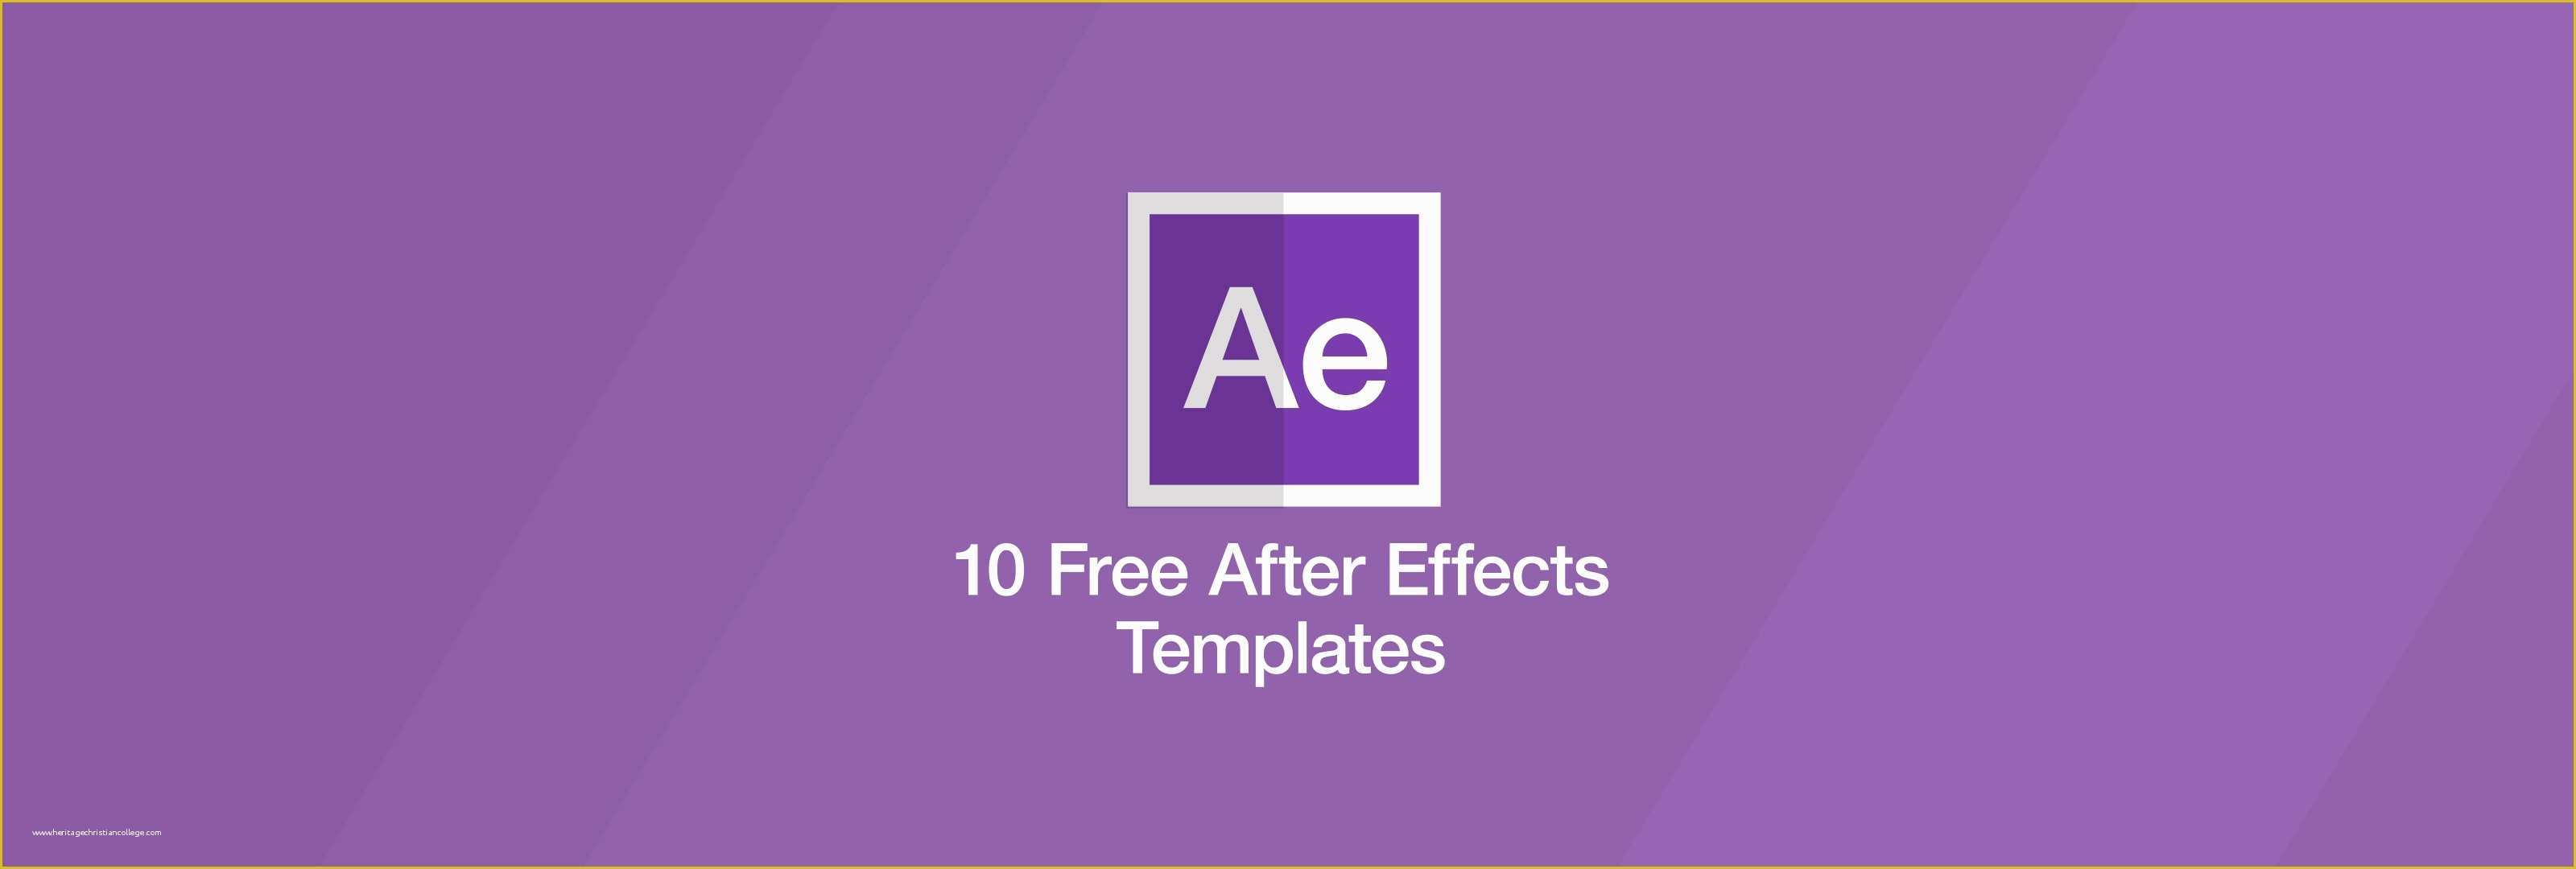 After Effects Holiday Templates Free Of Free after Effects Templates